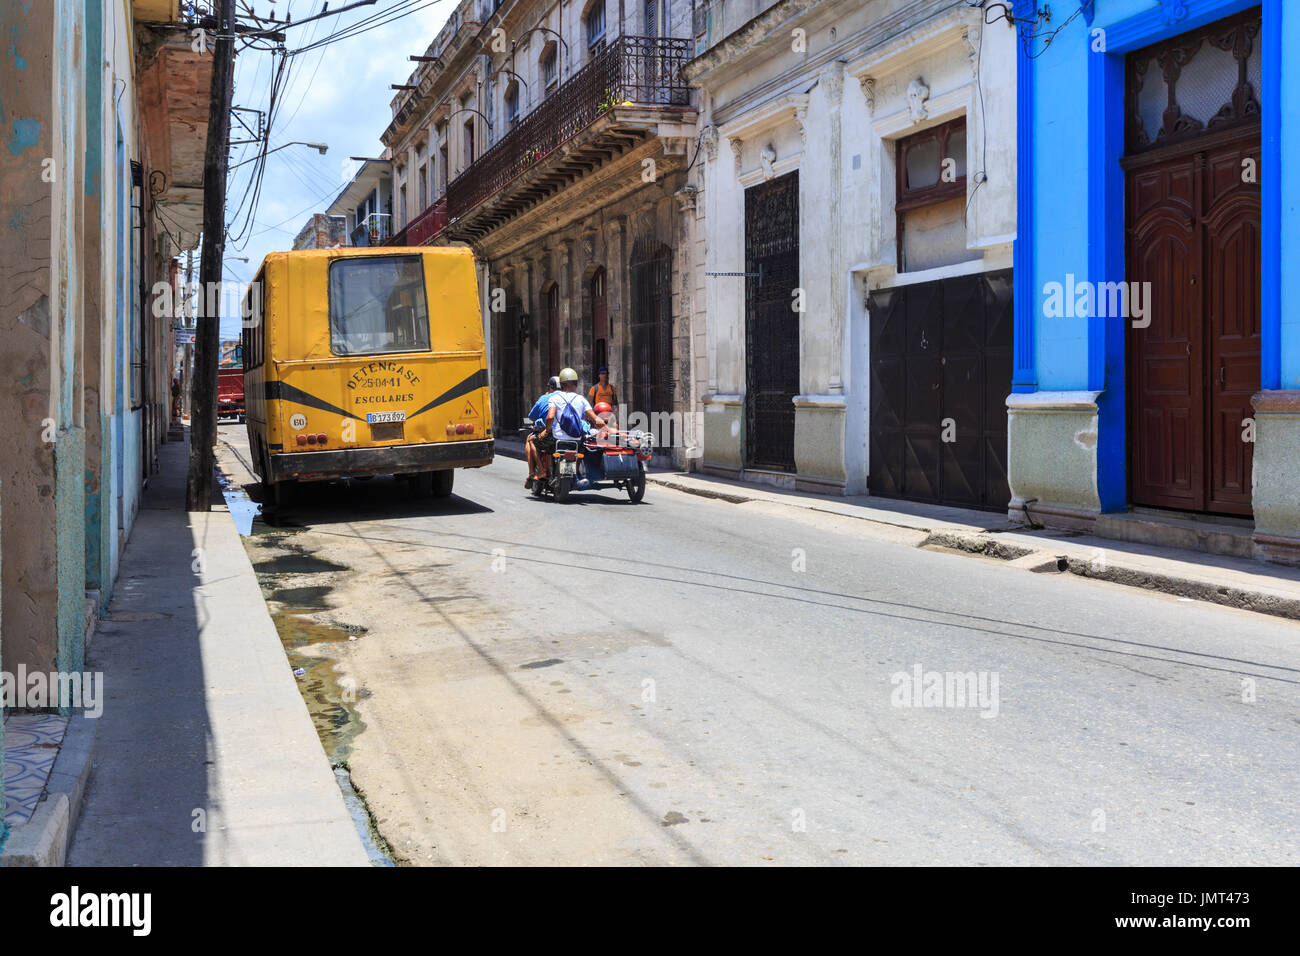 Street scene with vintage school bus and people on motorcycle in Matanzas, Cuba Stock Photo